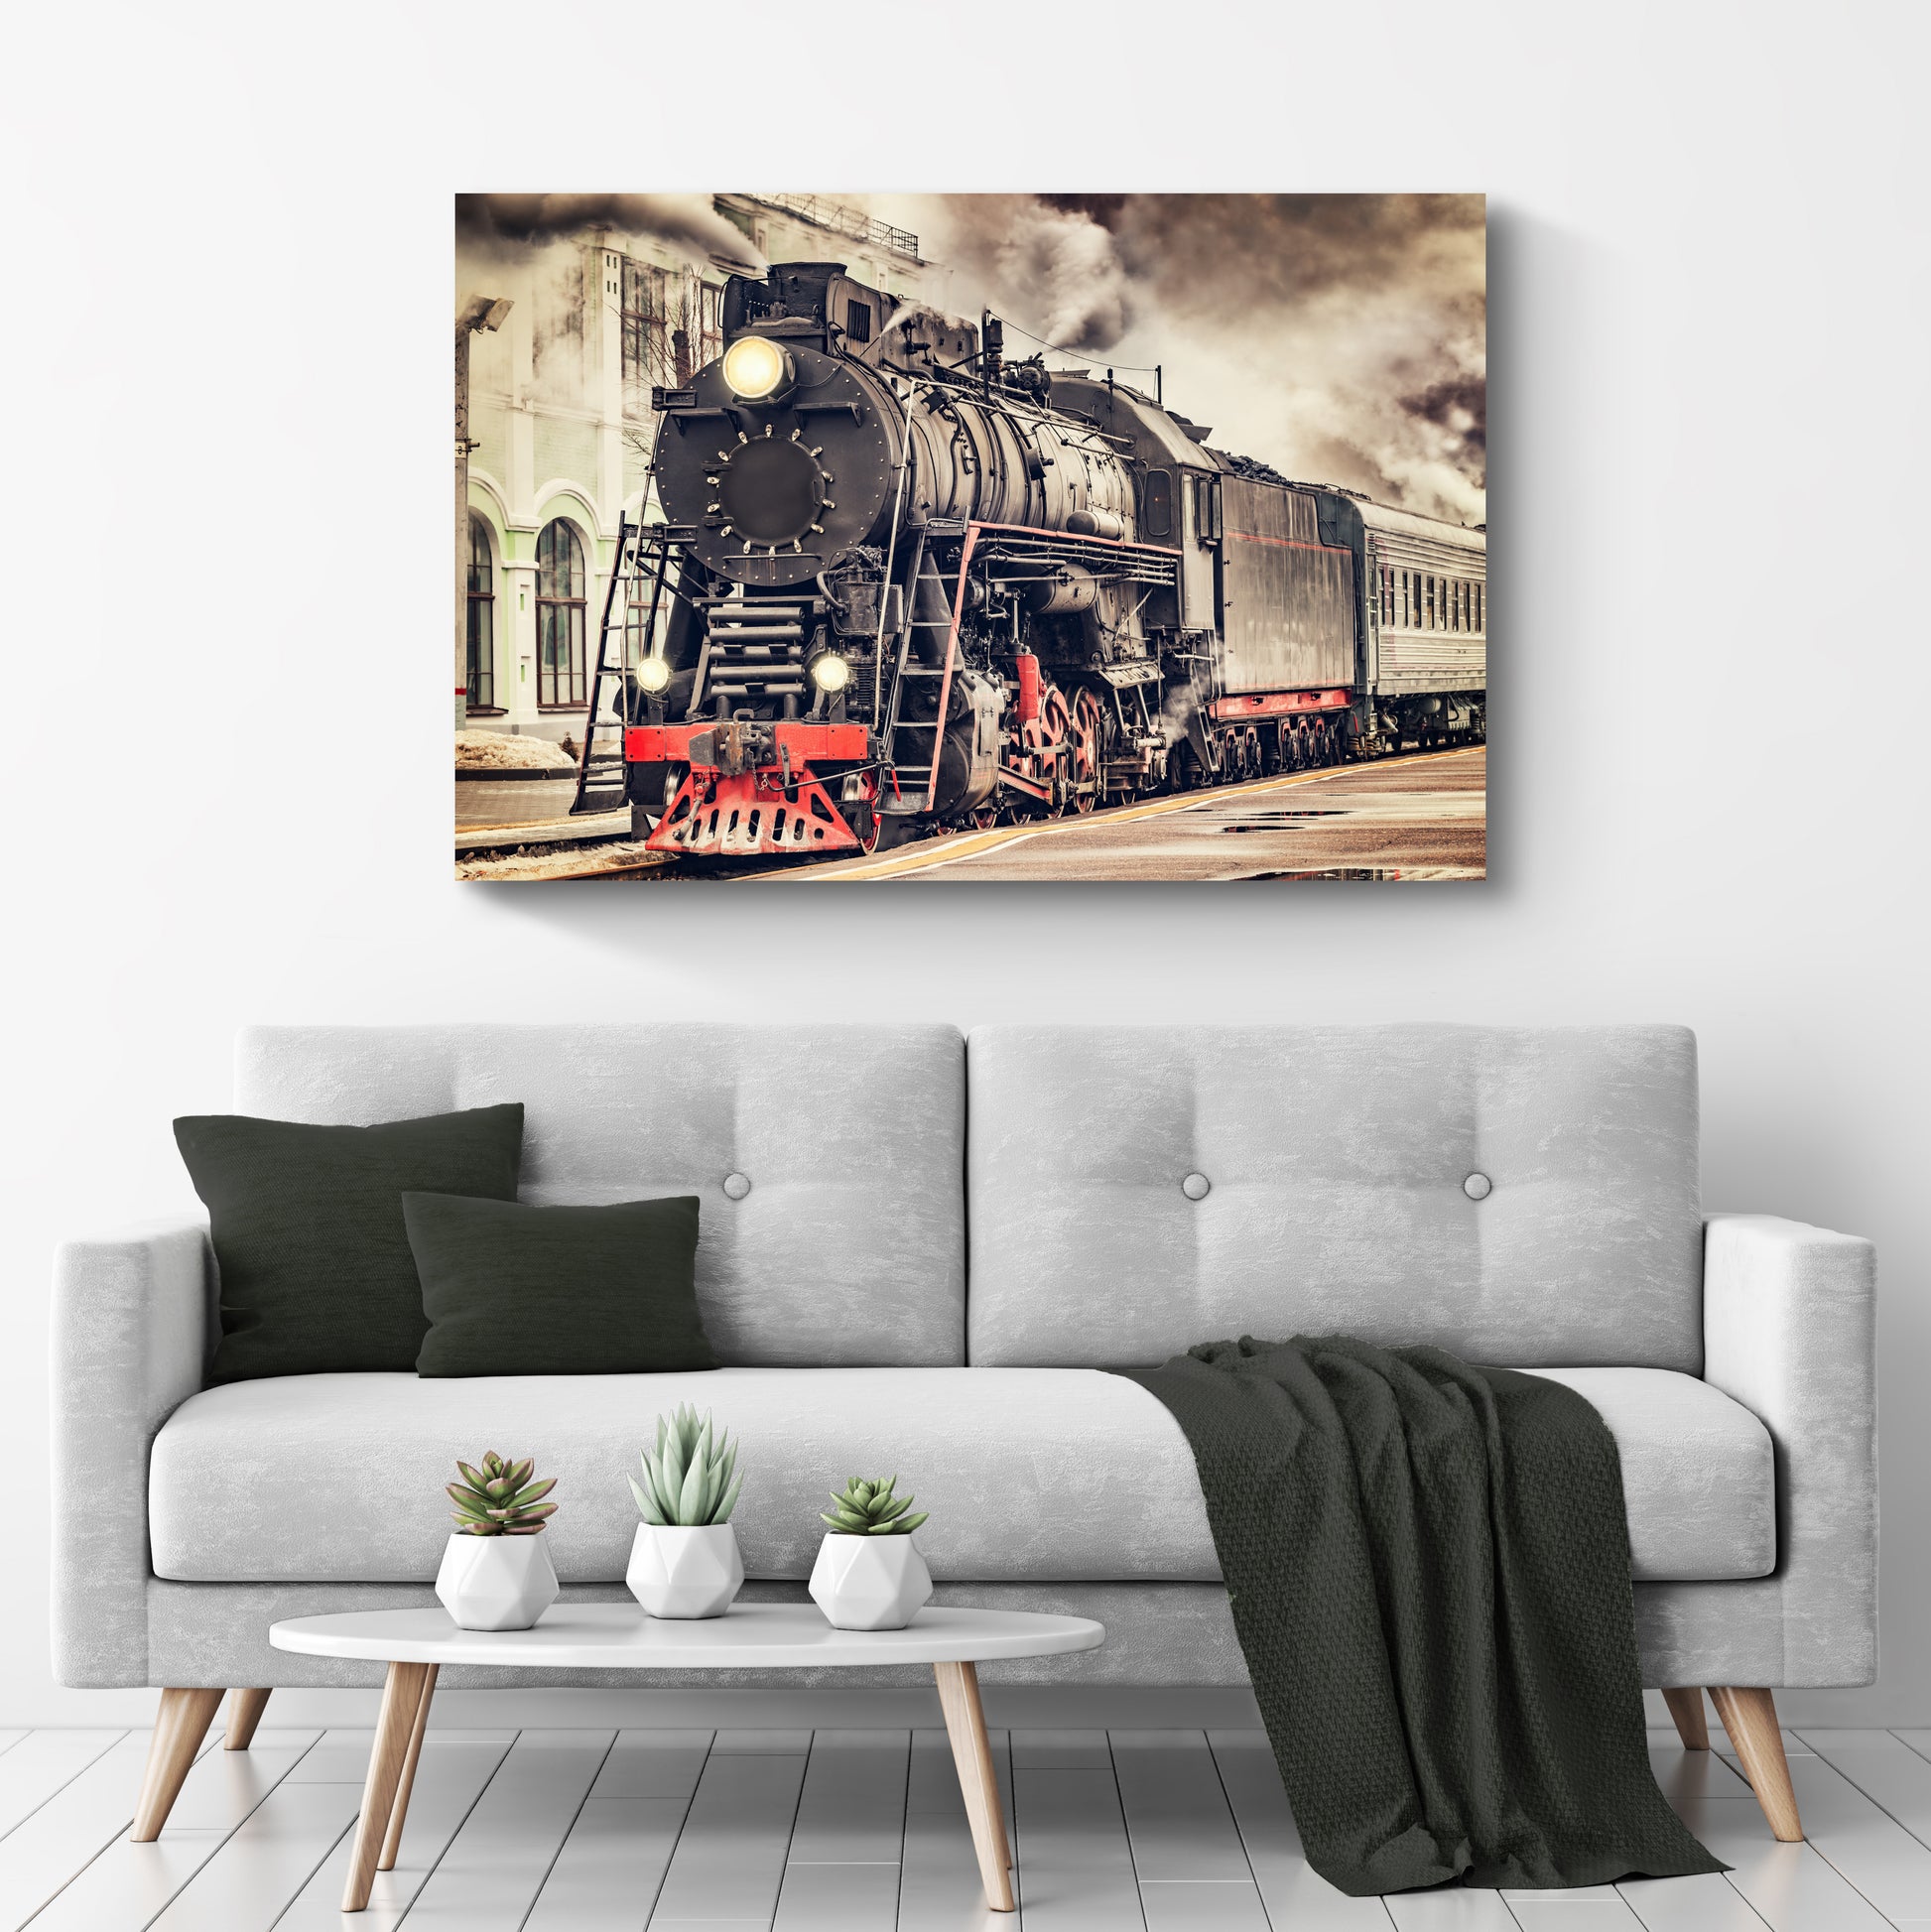 Vintage Train Canvas Wall Art - Image by Tailored Canvases